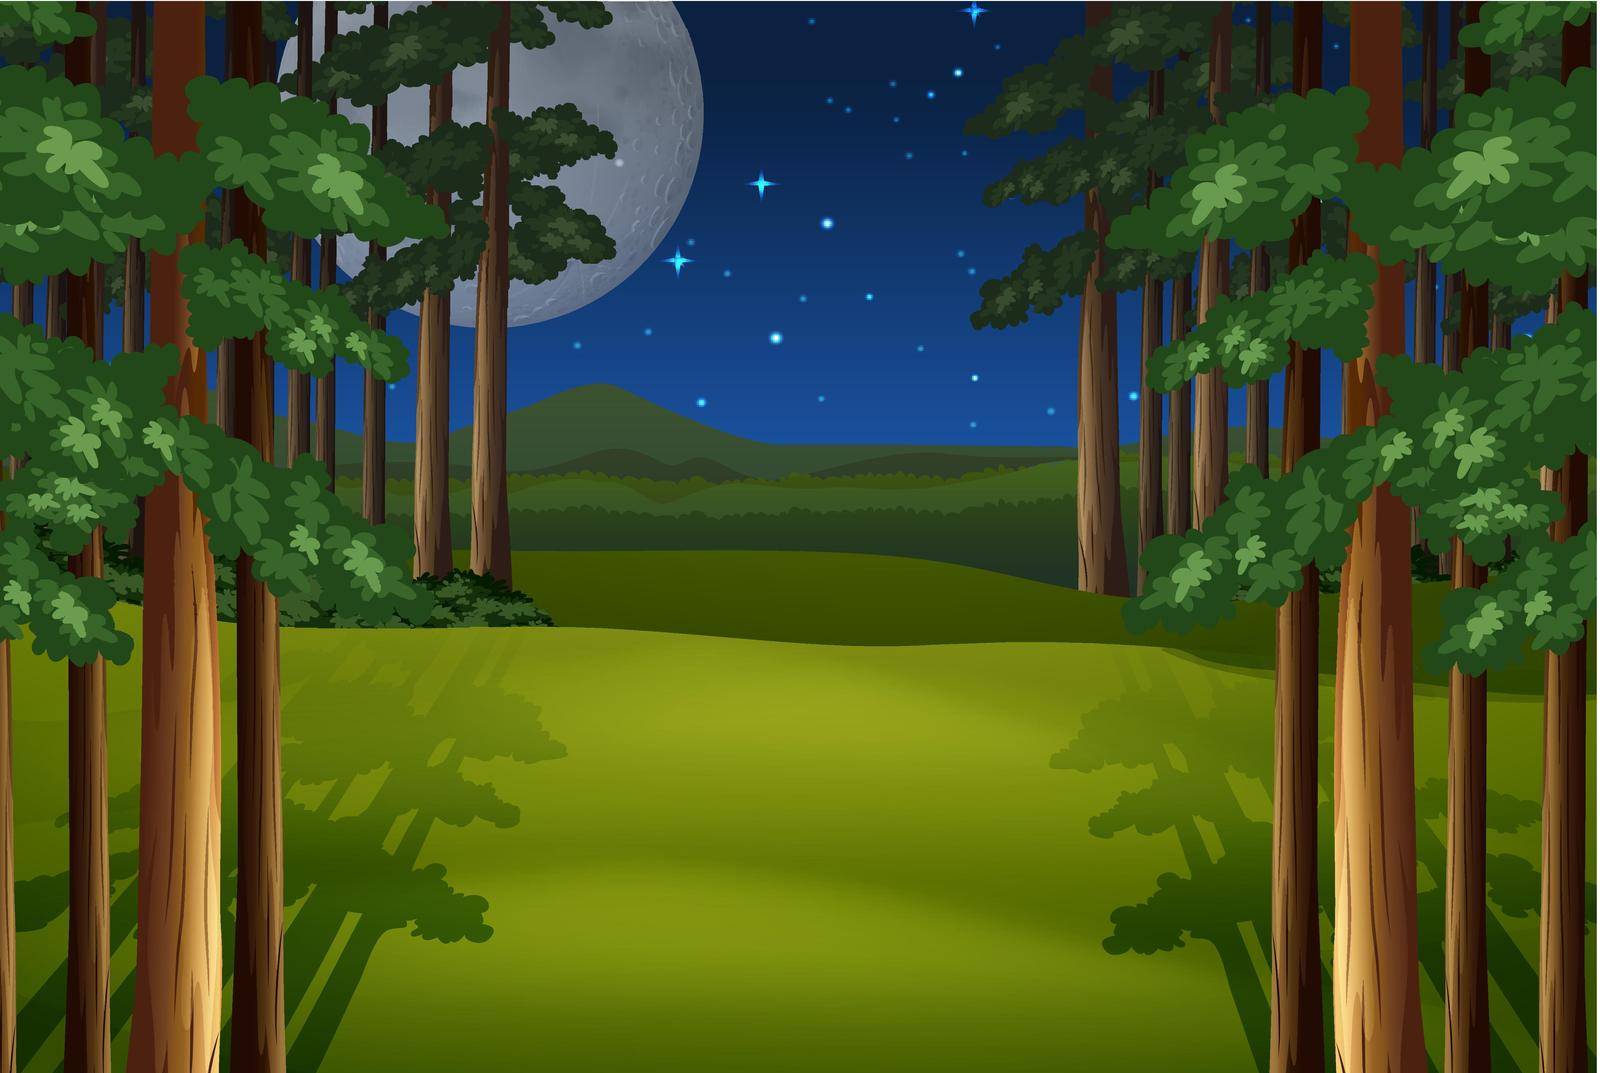 Scenery of a forest on a full moon night with stars